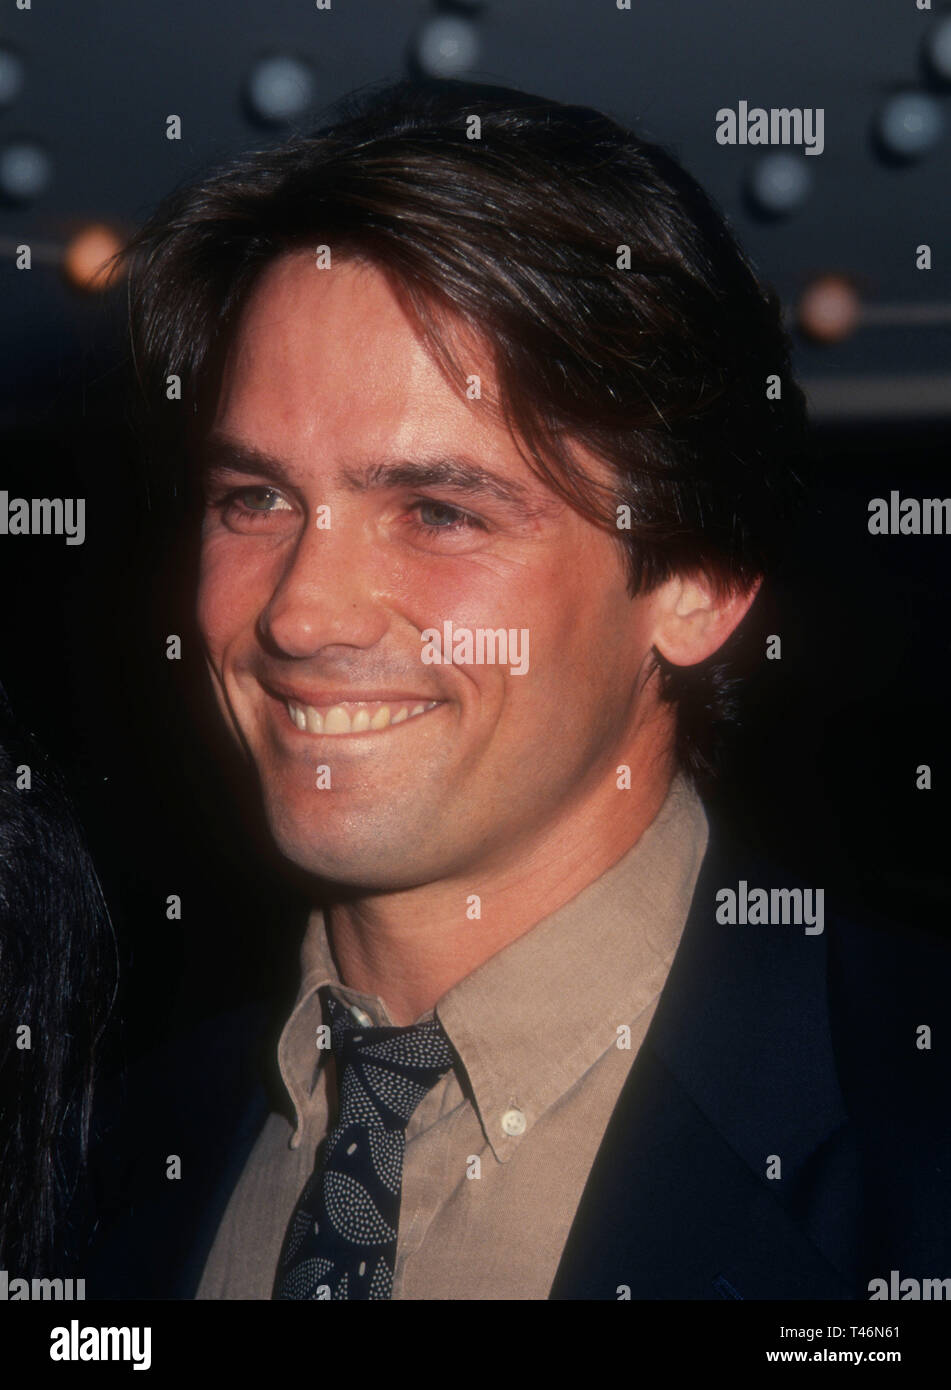 Billy campbell hires stock photography and images Alamy